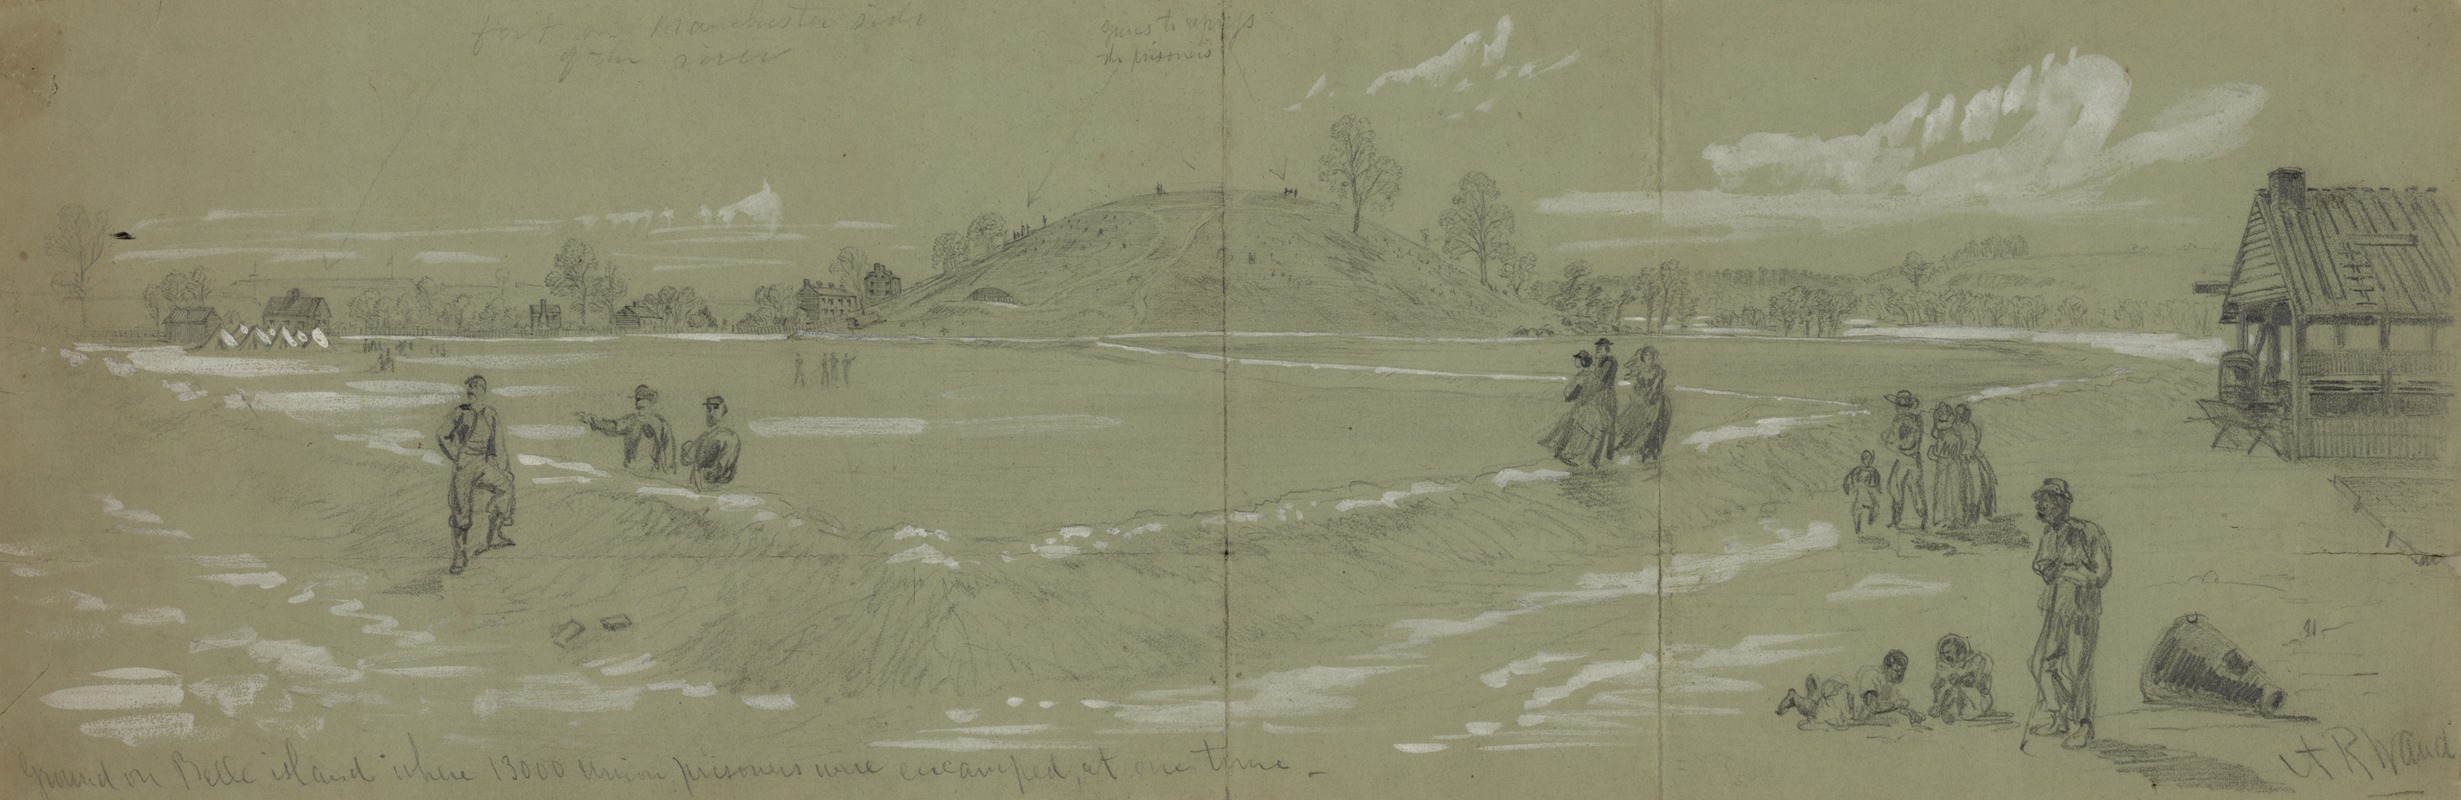 Alfred Rudolph Waud - Ground on Belle island where 13000 Union prisoners were encamped at one time